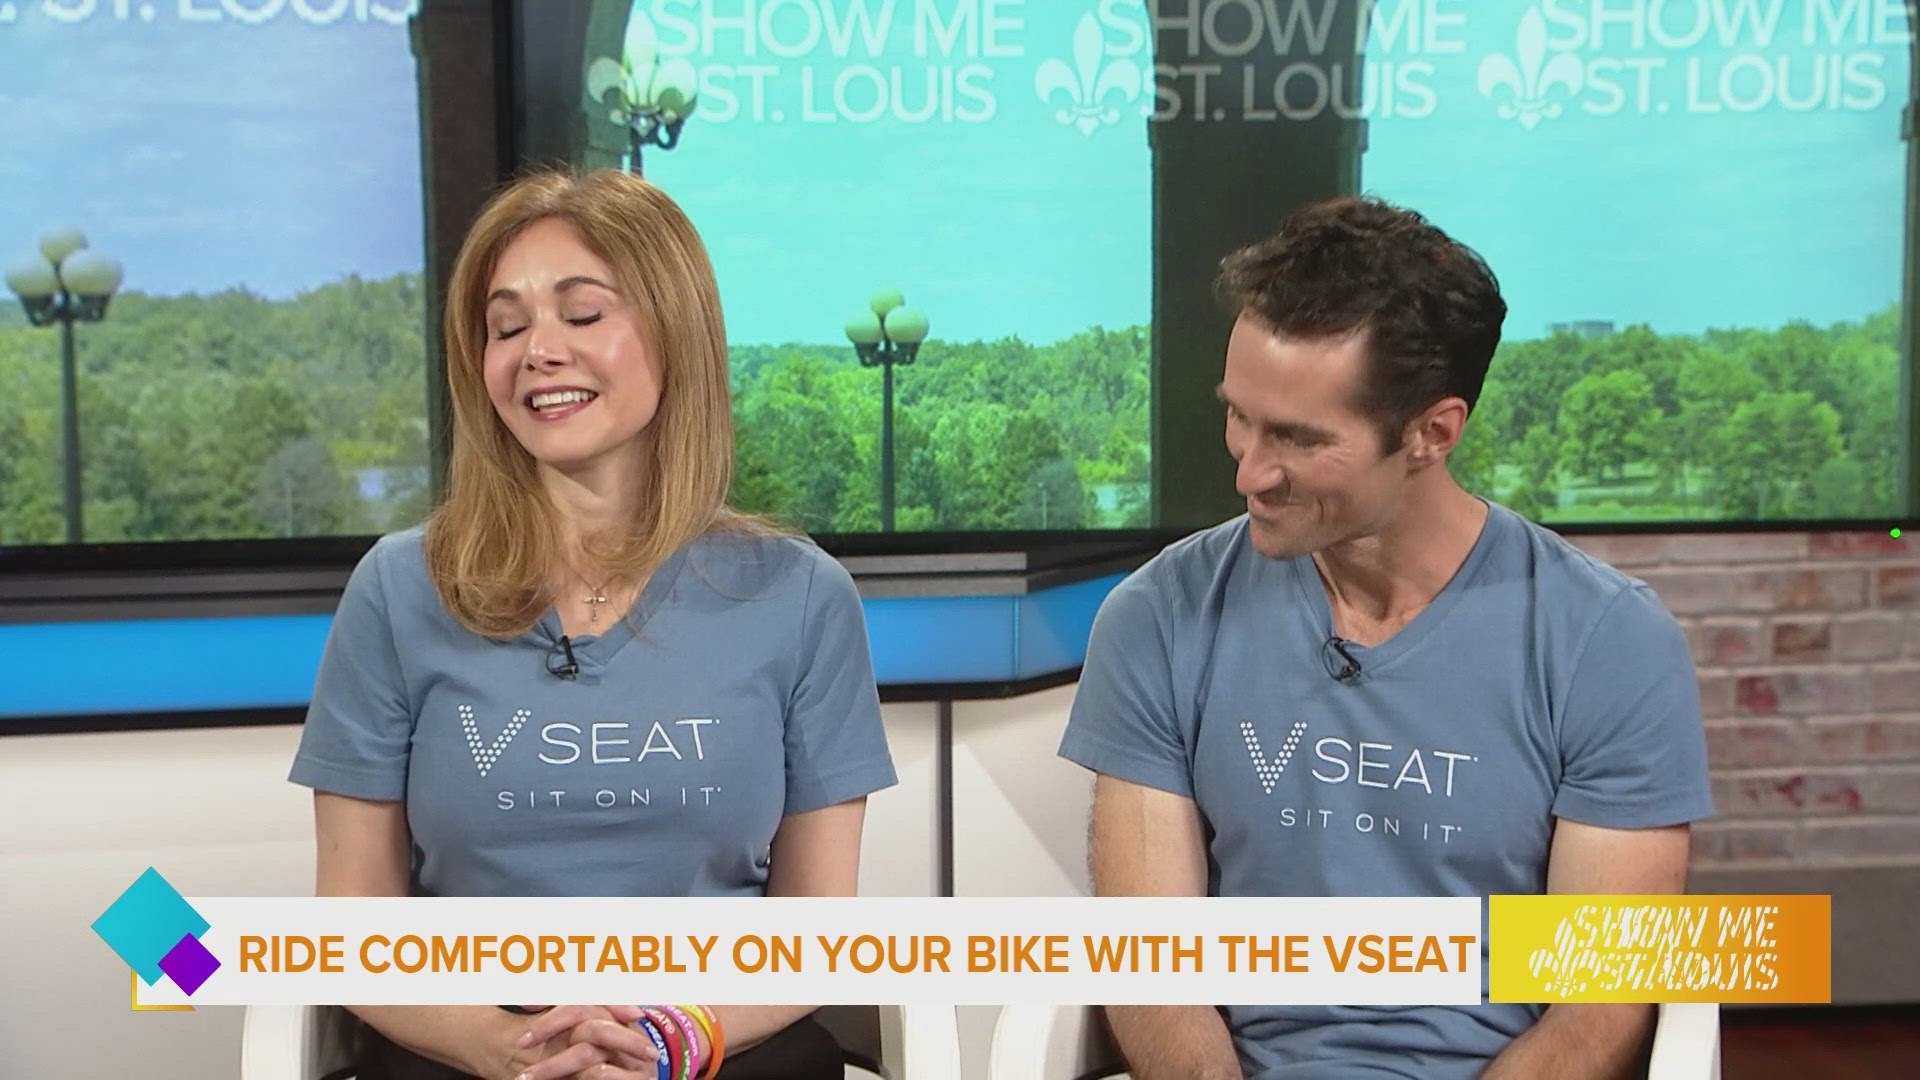 VSEAT joined Show Me St. Louis Live in Studio today